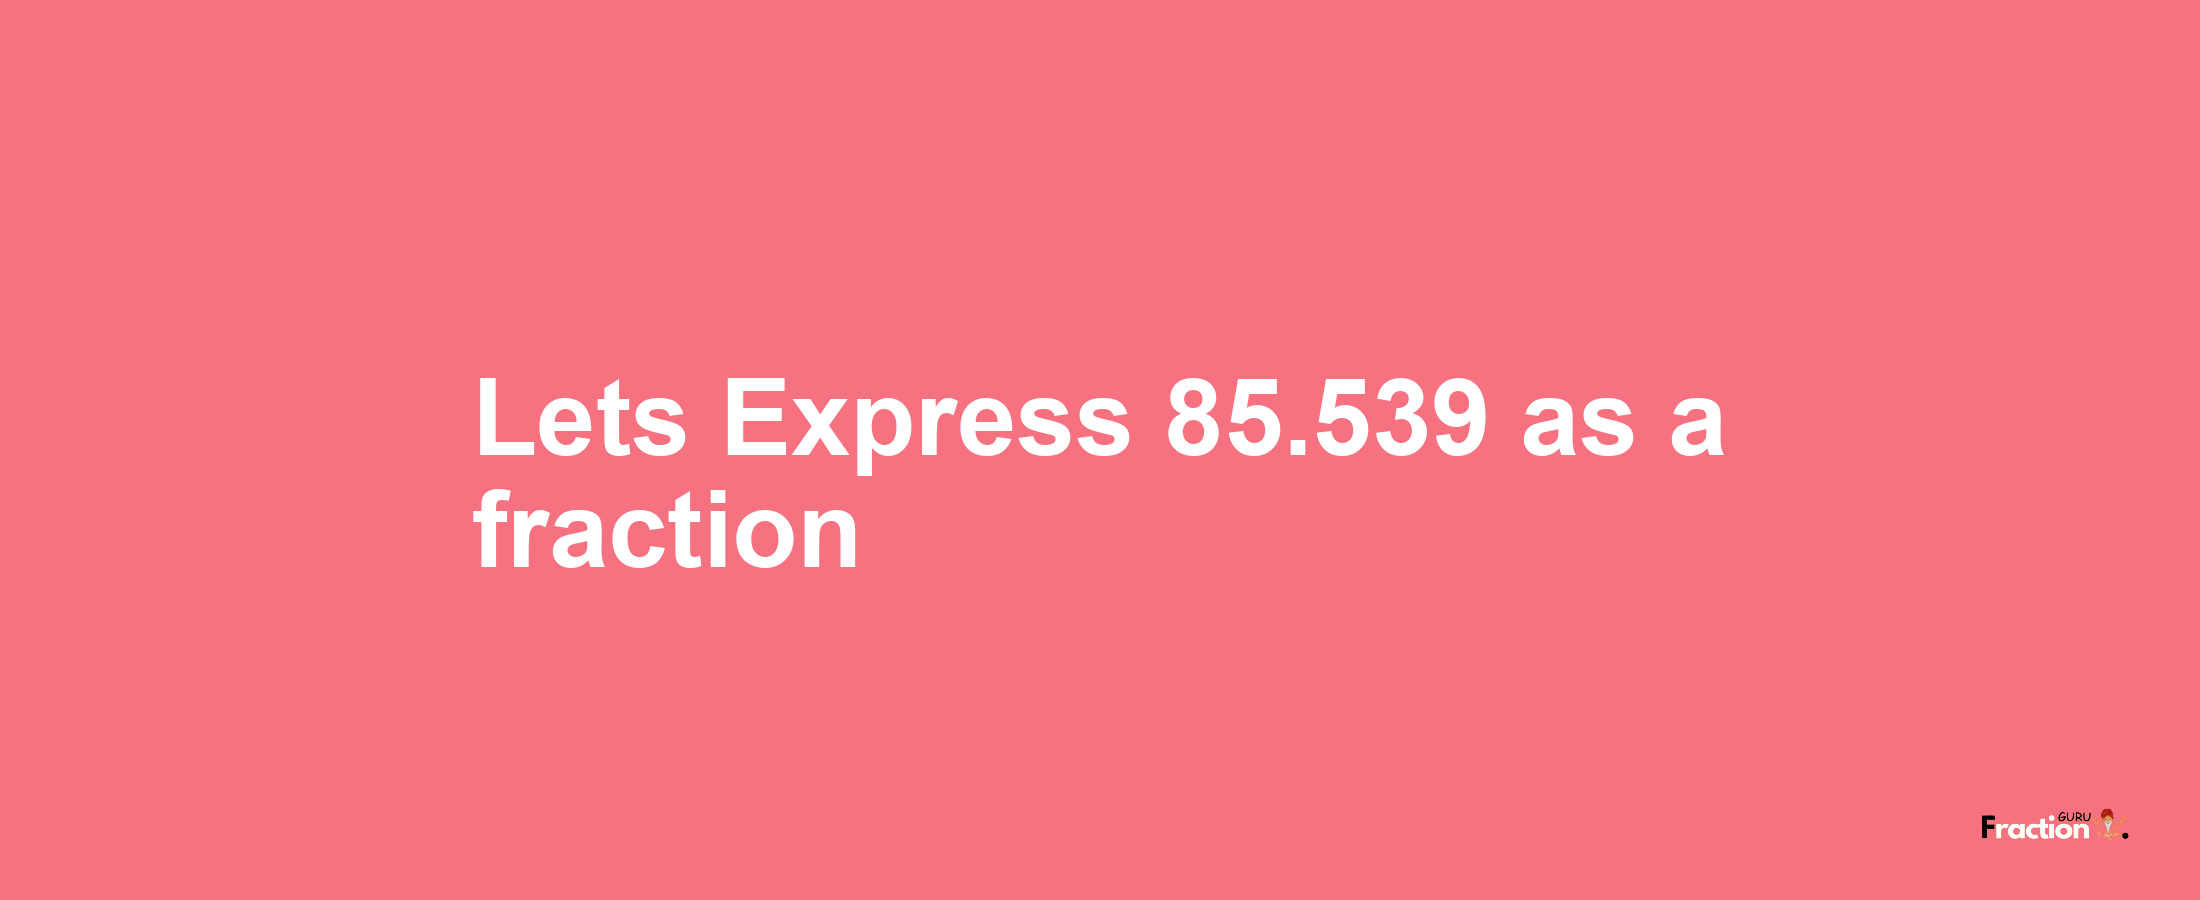 Lets Express 85.539 as afraction